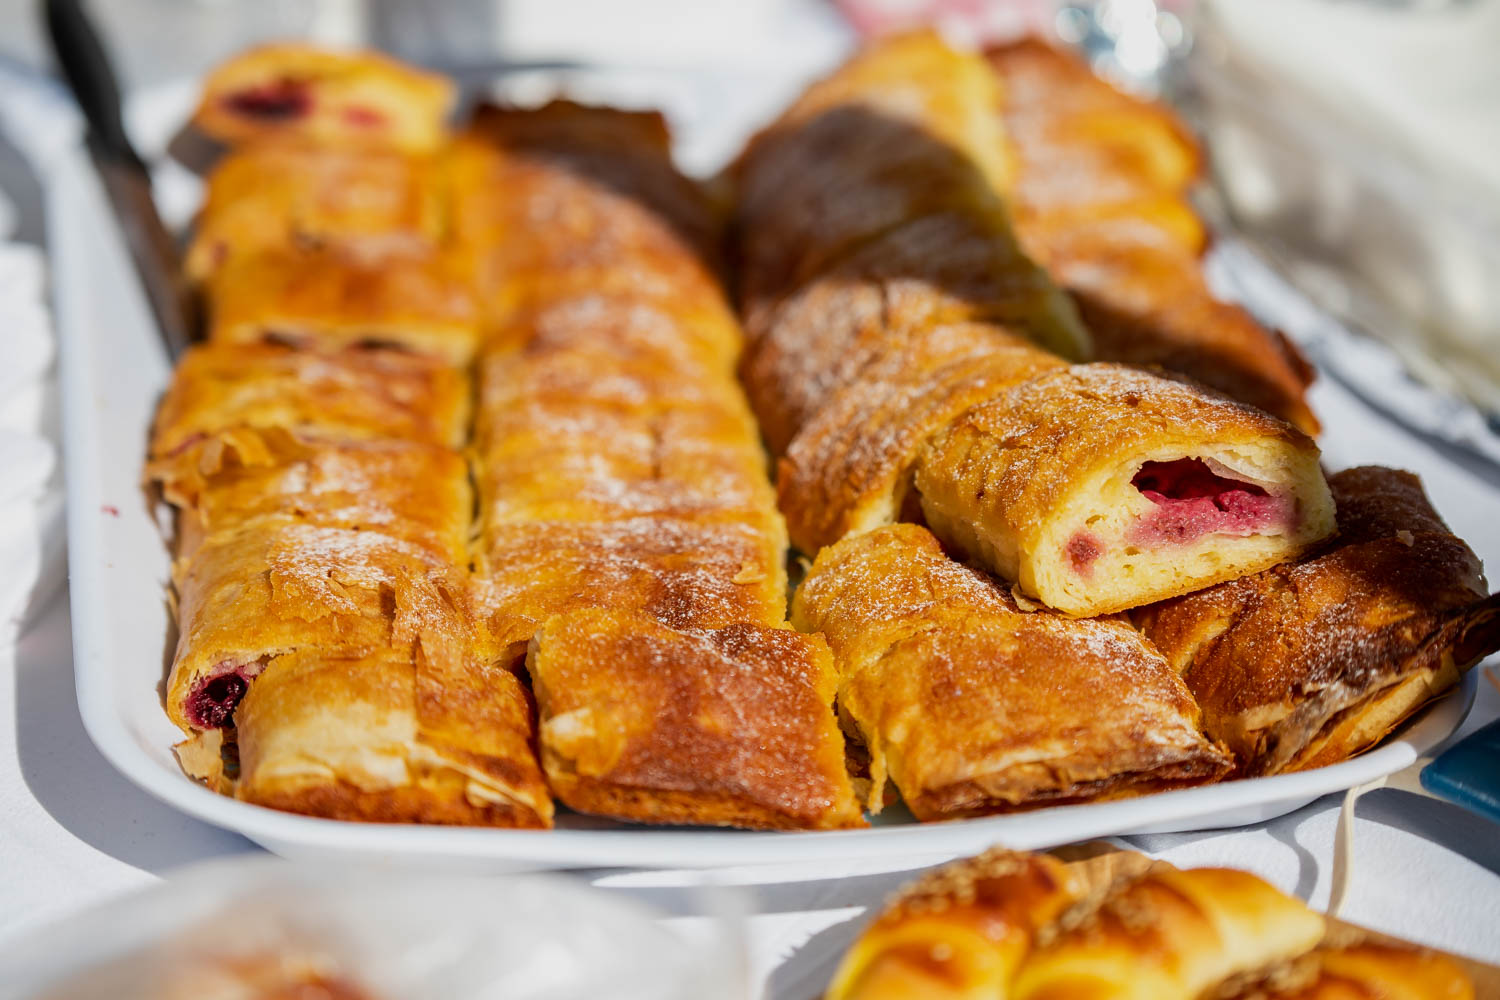 Thousands turn out as Croatian strudel fest opens